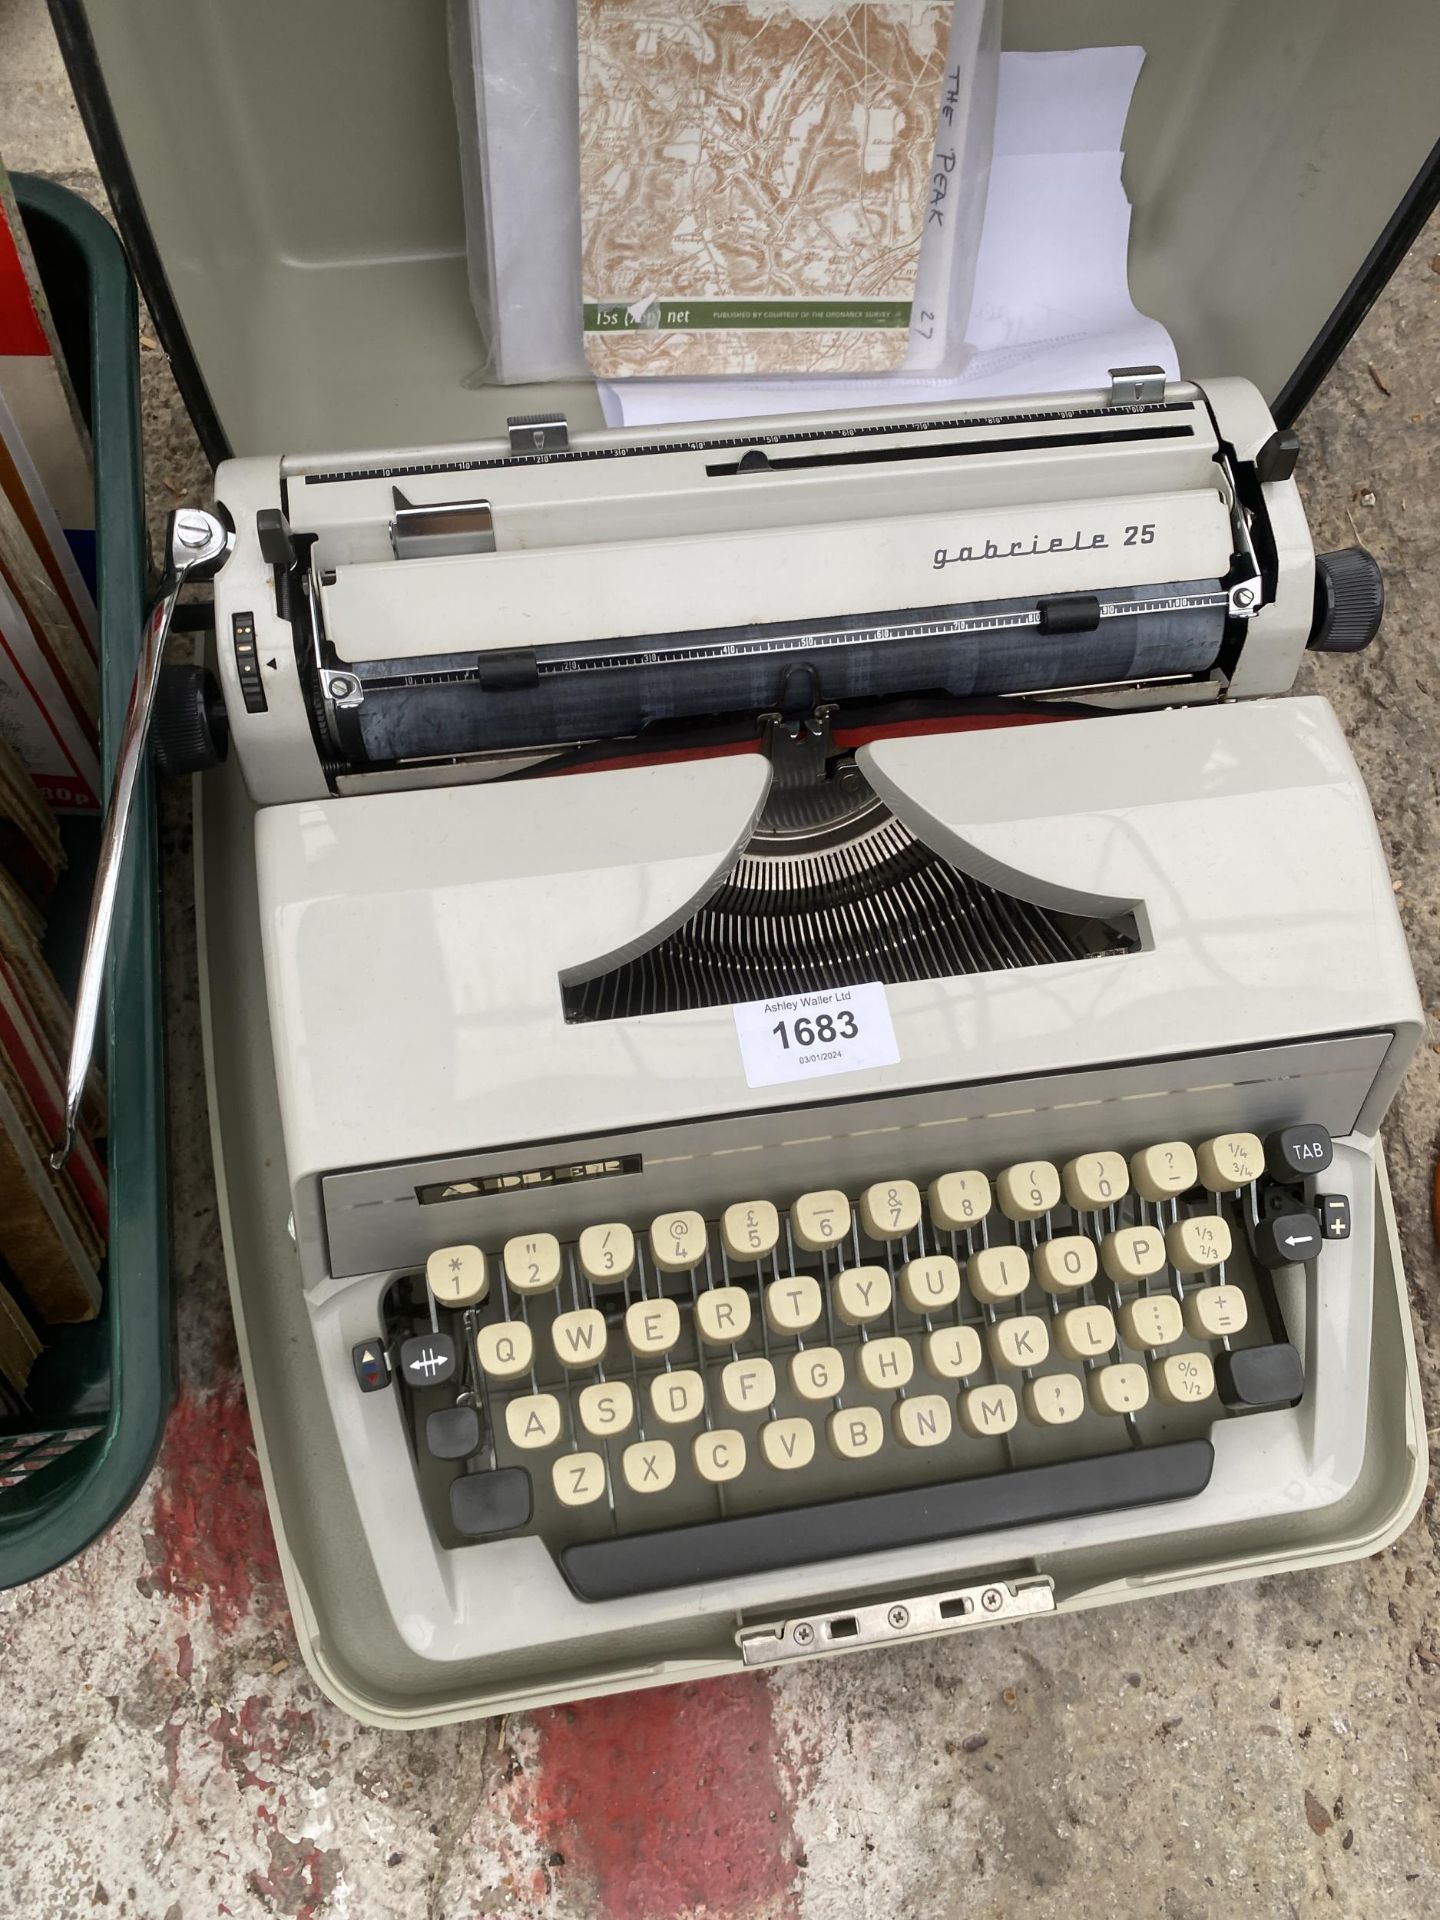 A RETRO GABRIELE 25 TYPEWRITER AND AN ASSORTMENT OF MAPS - Image 2 of 3